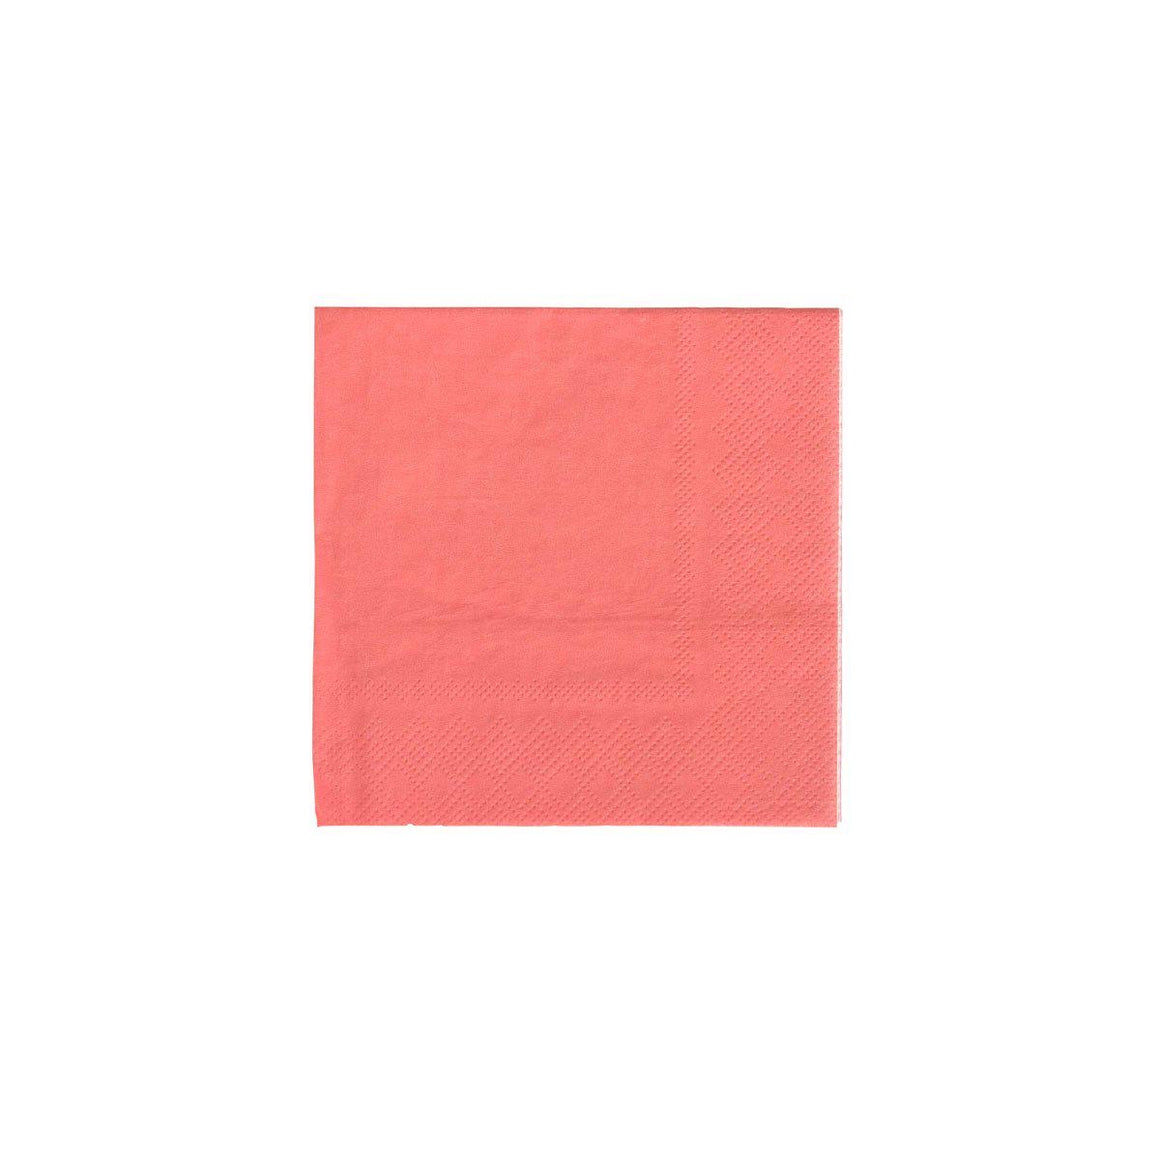 NAPKINS - SMALL CORAL OH HAPPY DAY